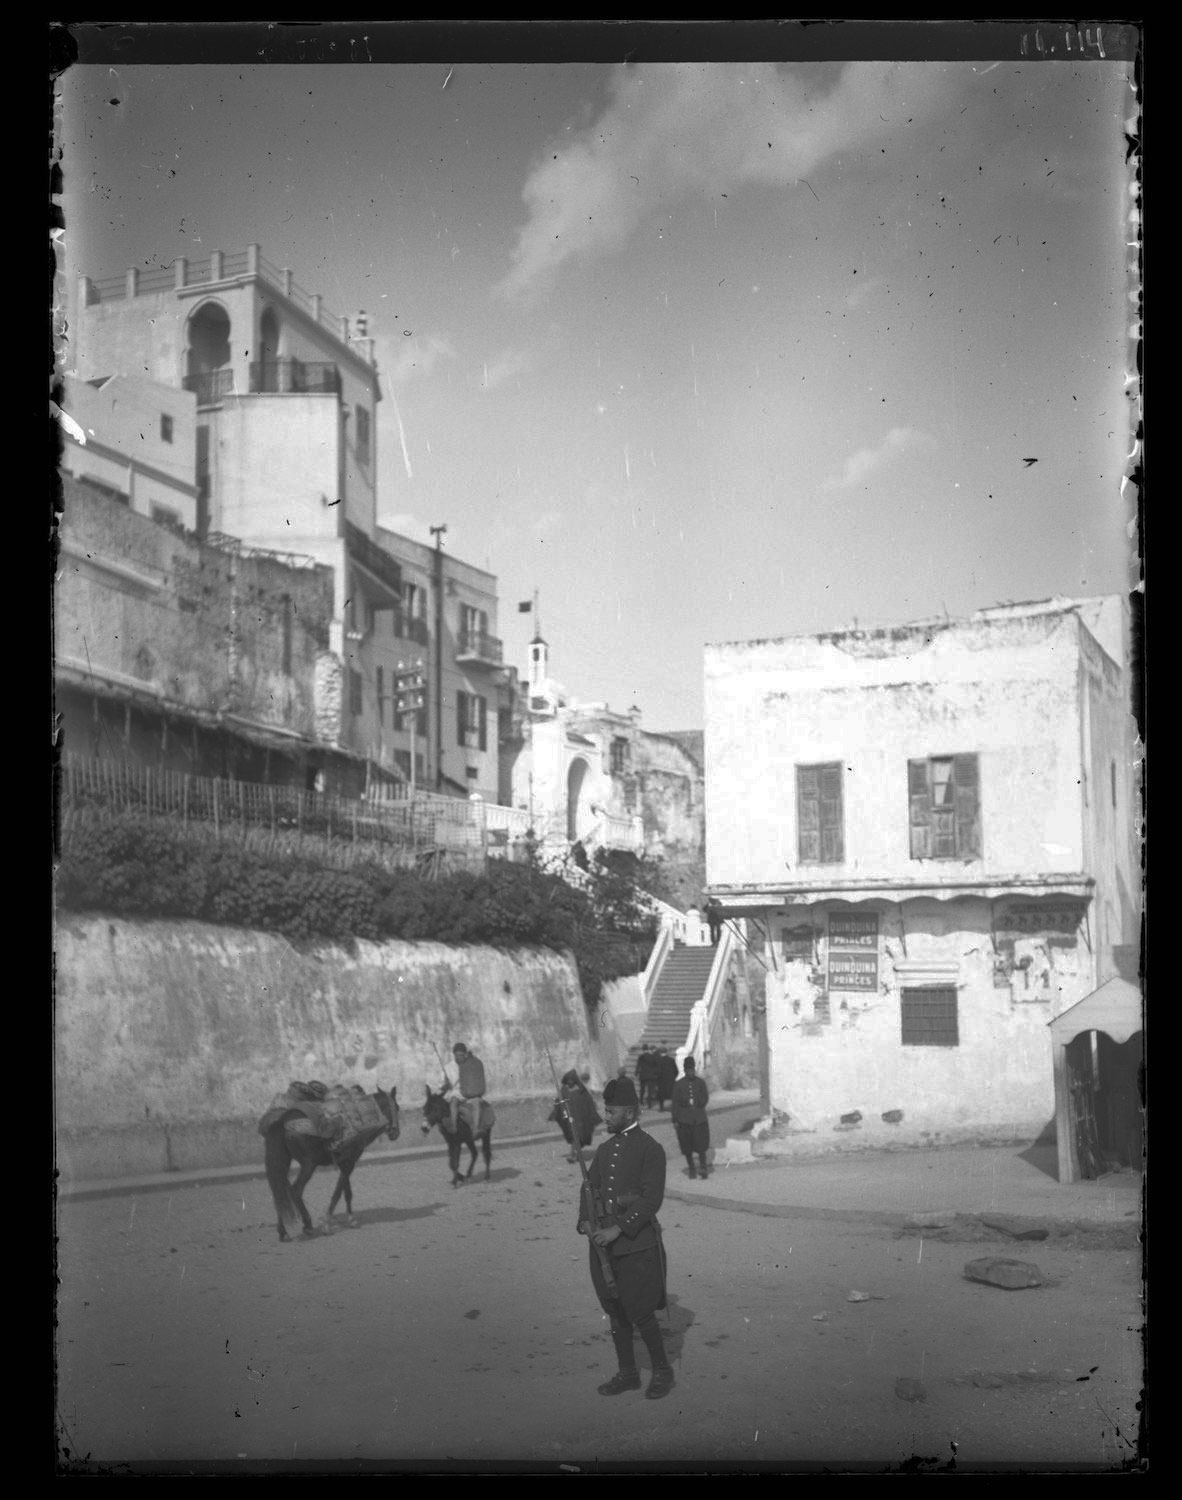 A soldier stands guard by a staircase in the Medina Walls